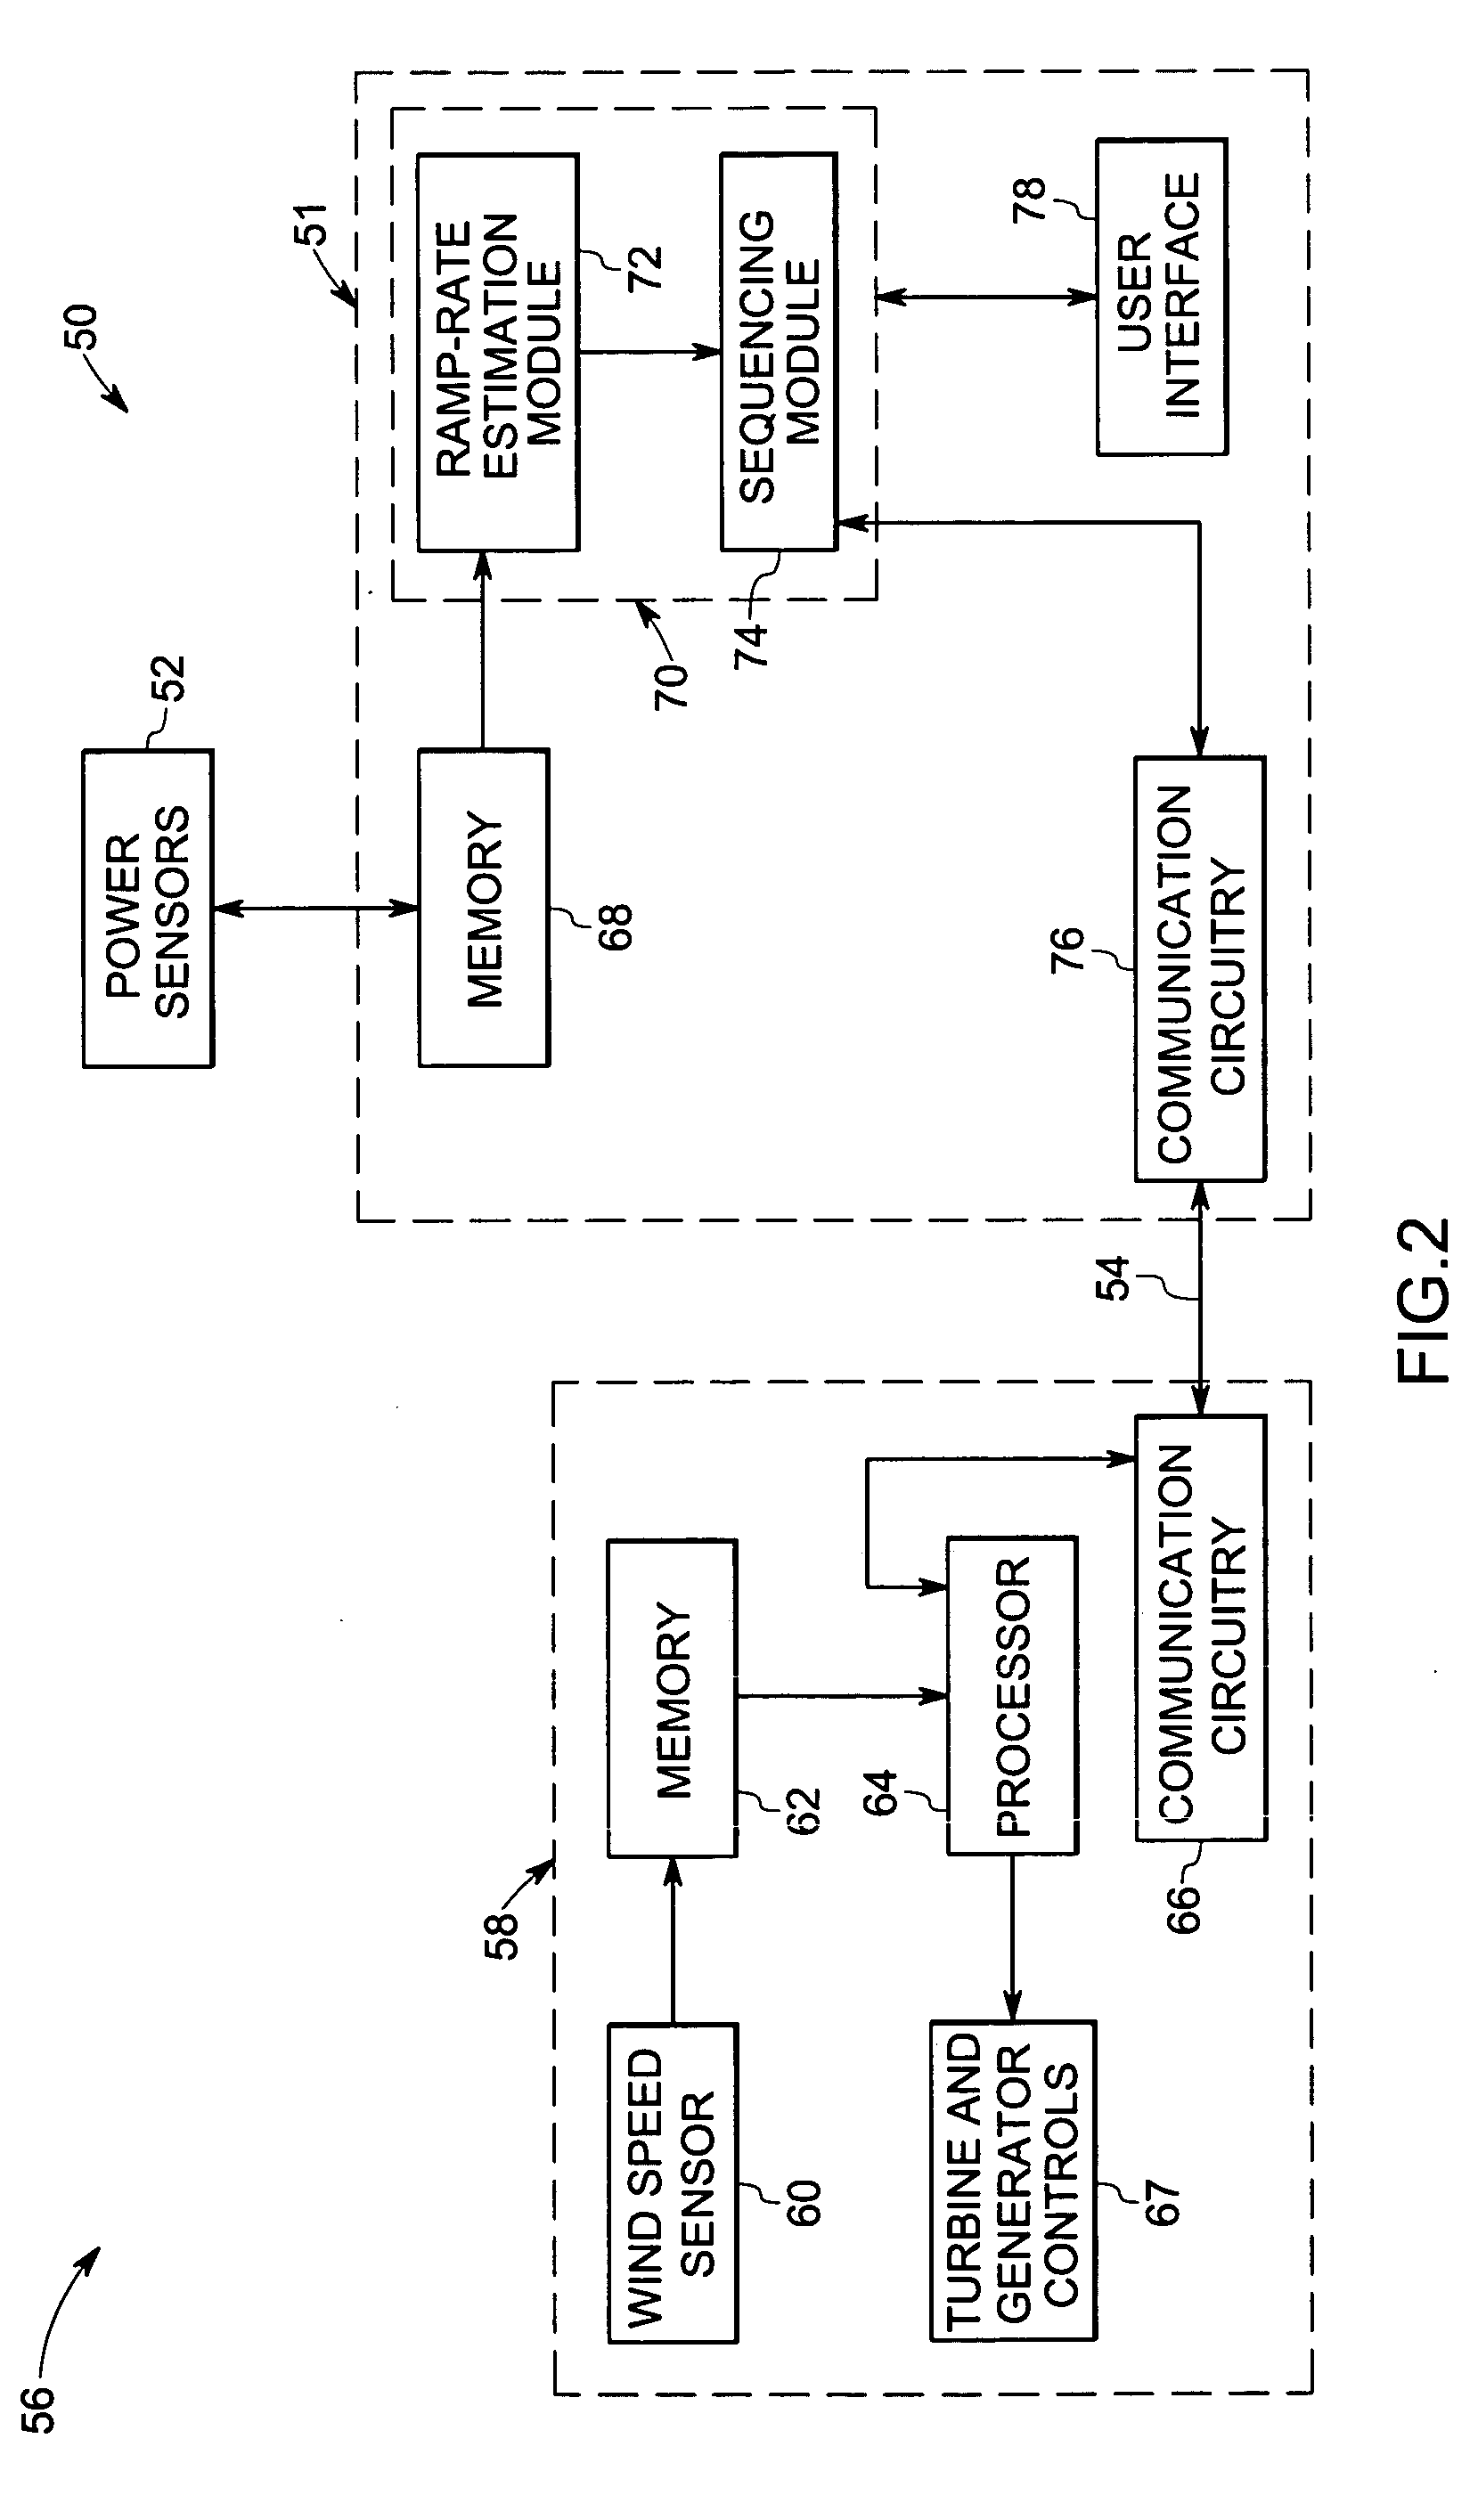 System and method for operating a wind farm under high wind speed conditions